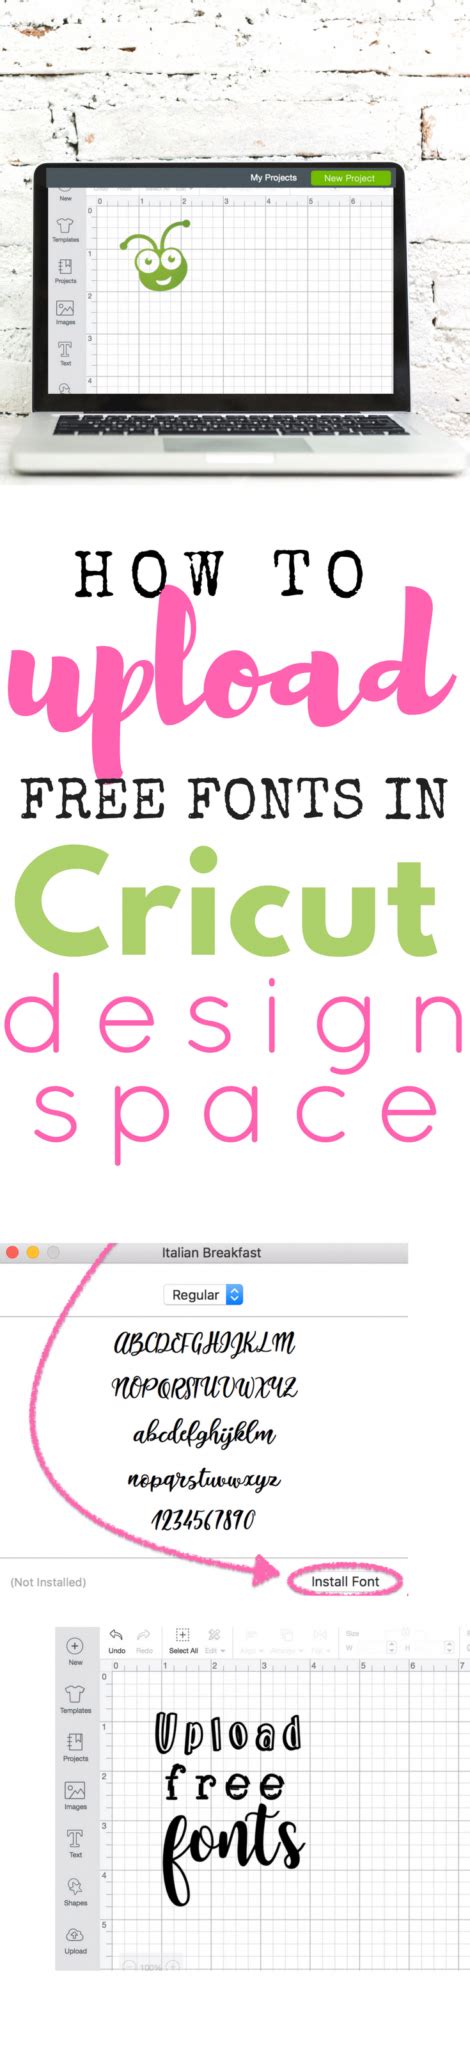 Some of the free cricut diy projects in cricut design space can be used to sell these cricut project ideas will introduce all the cricut craft ideas that you can make as a newbie cricut beginner. Cricut Tips & Tutorial •How to upload a font into cricut ...